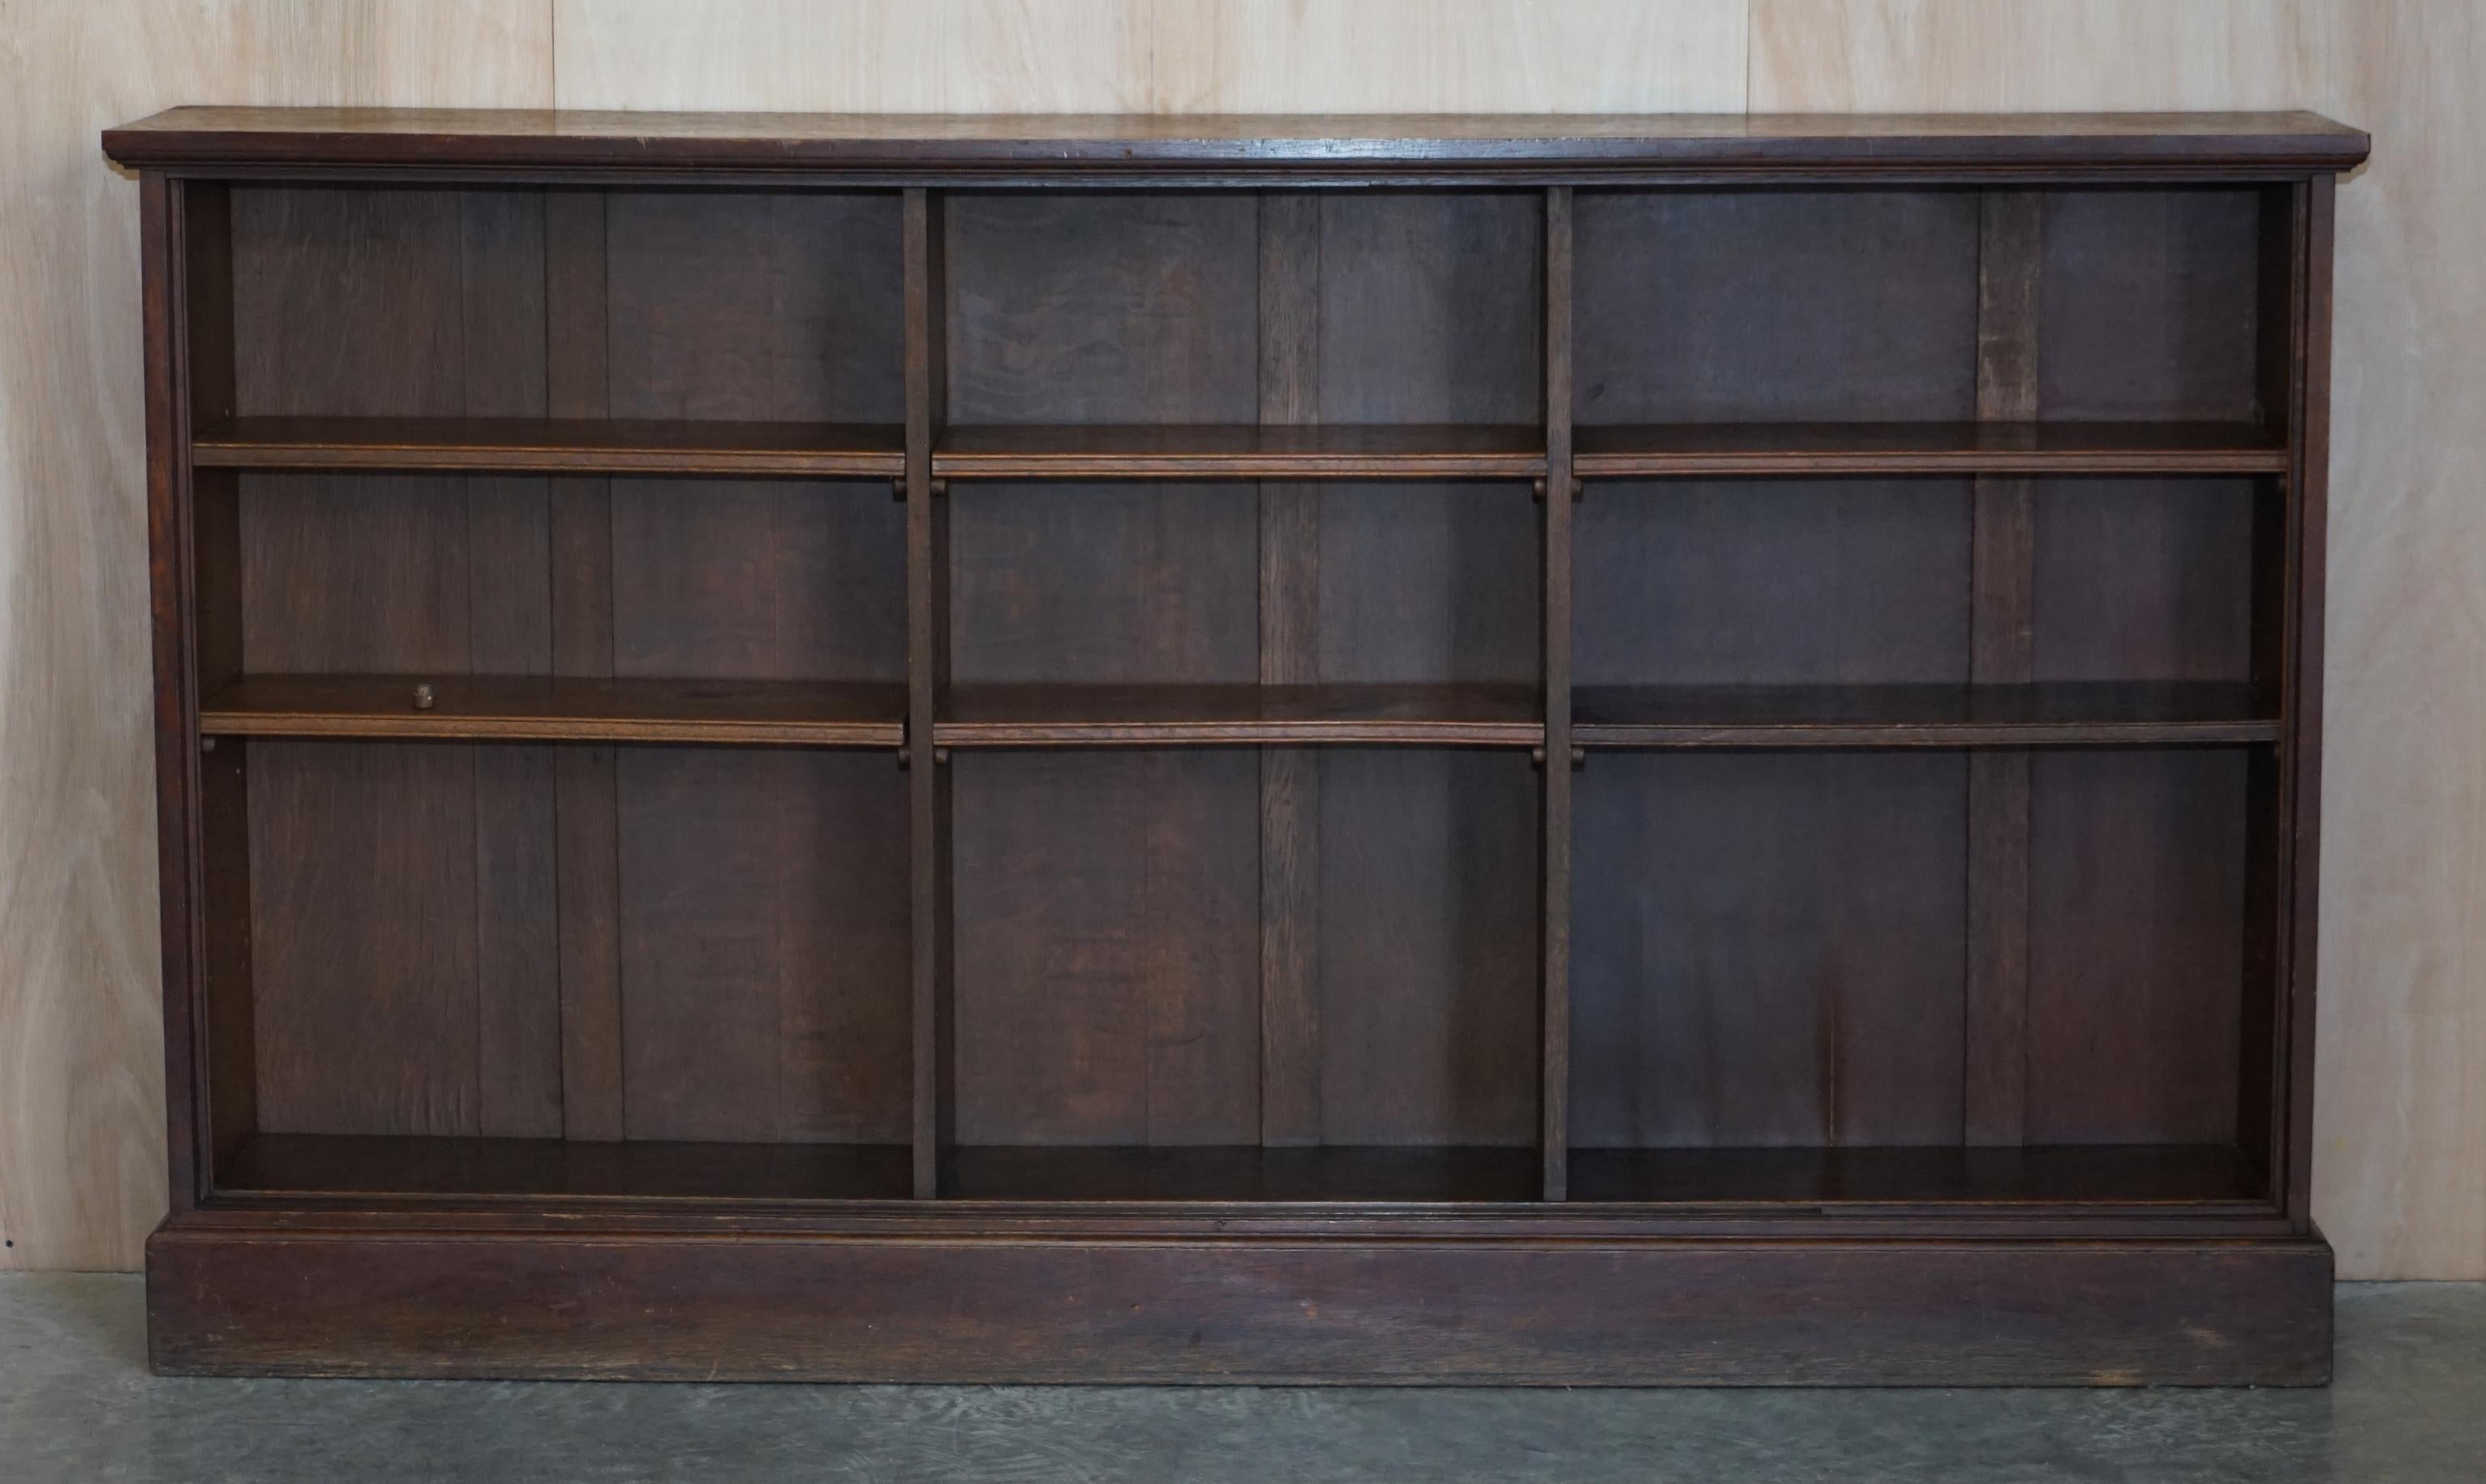 We are delighted to offer for sale 1 of 2 large dwarf open library bookcases circa 1880 in English oak

As mentioned this is one of two, the other is 60cm smaller than this one and is listed under my other items, it is not included in this